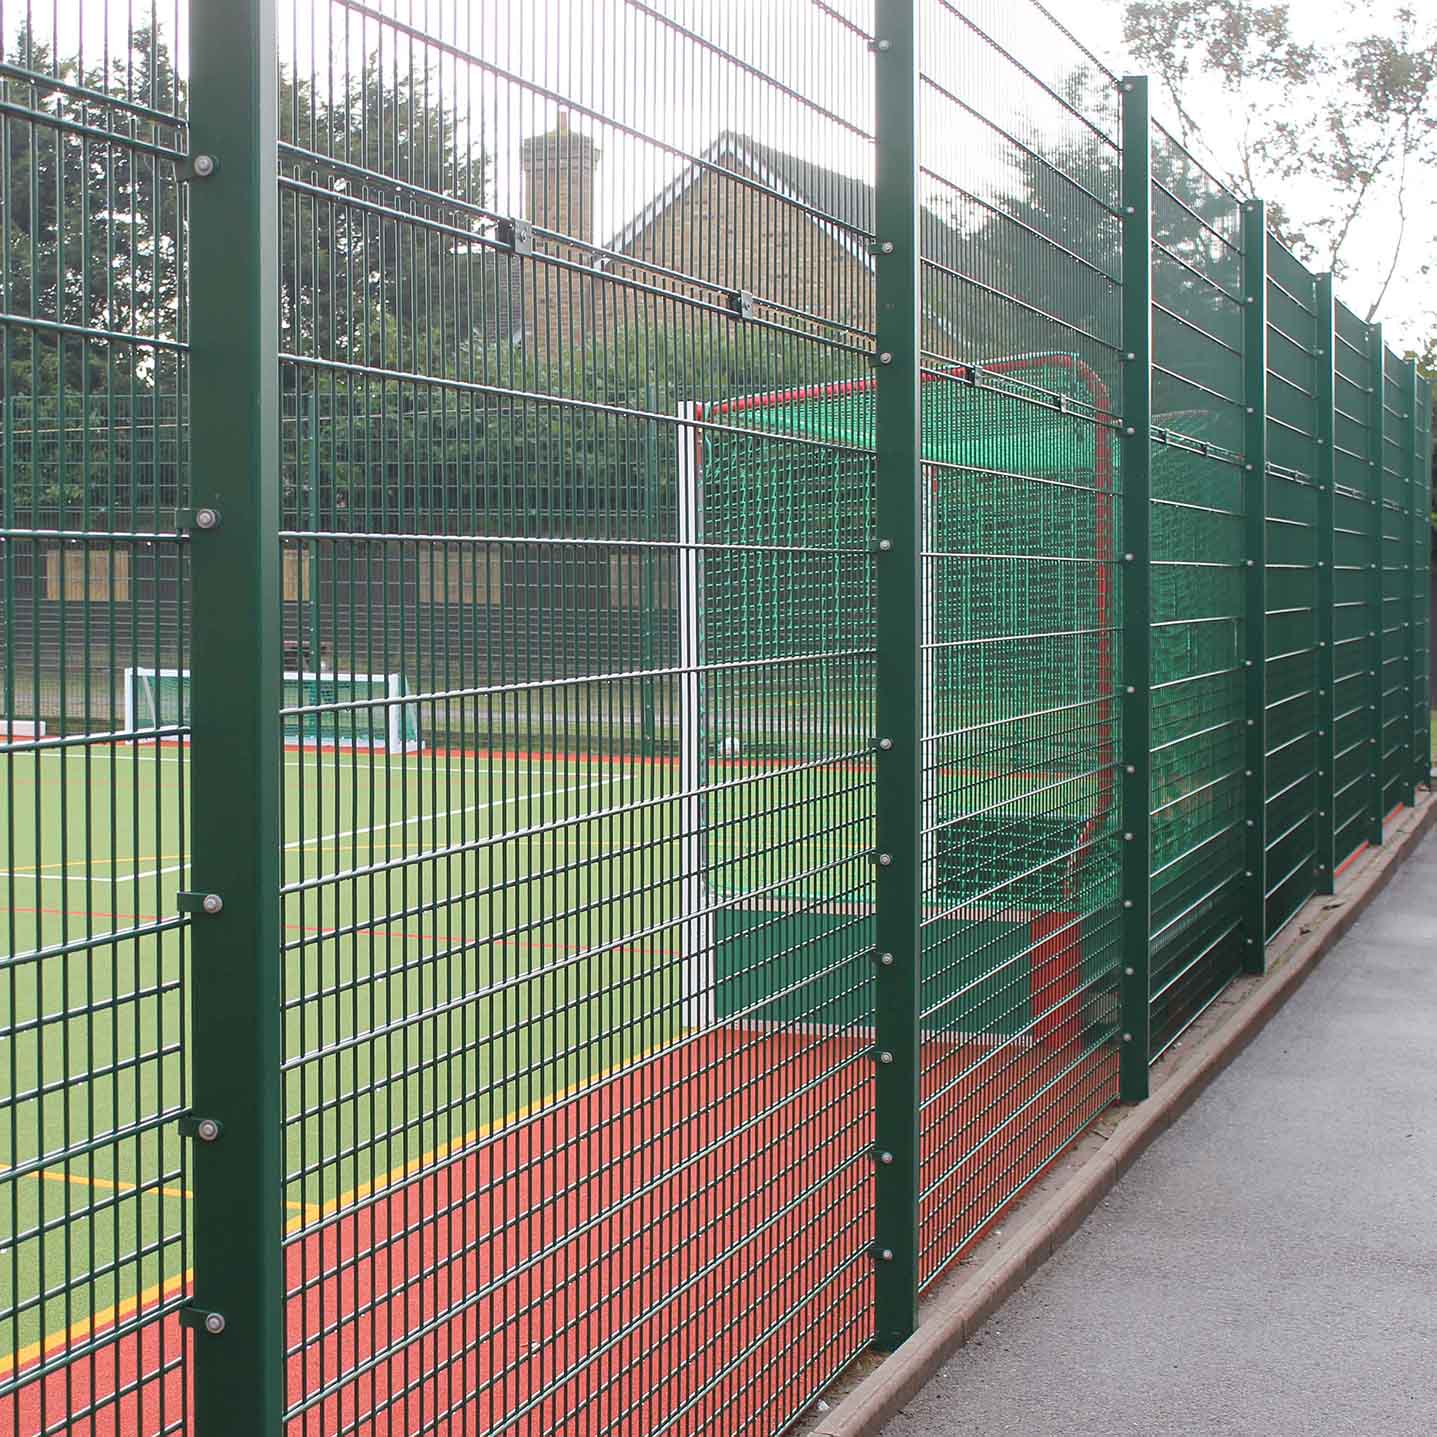 Sports fencing and enclosures